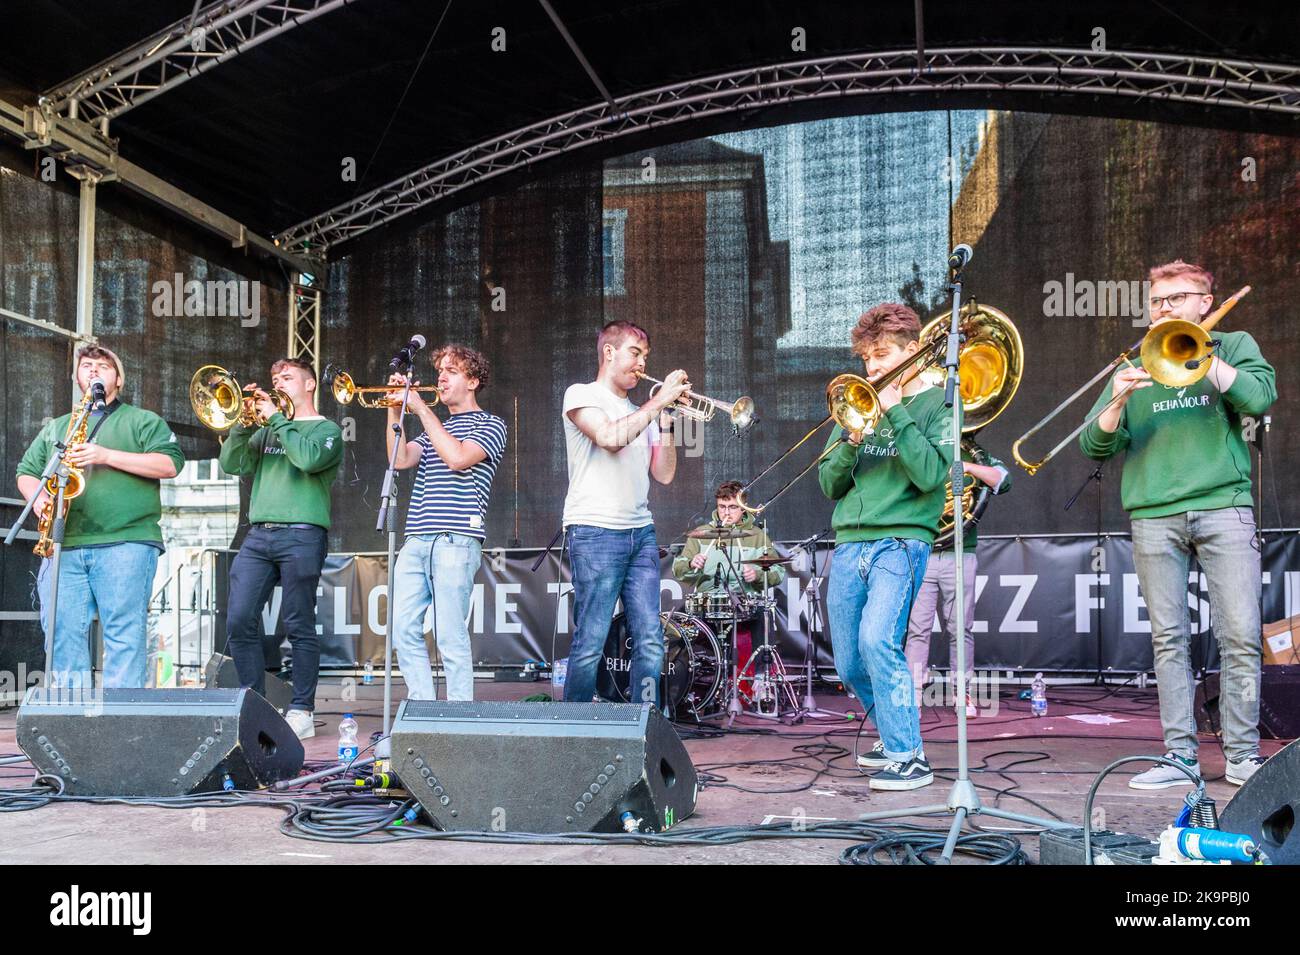 Cork, Ireland. 29th Oct, 2022. As part of the on-going 44th Guinness Cork Jazz Festival, Cork city based jazz band 'Code of Behaviour' played the stage outside the Cork Opera House this evening, attracting hundreds of jazz fans. The festival continues until Monday. Credit: AG News/Alamy Live News Stock Photo